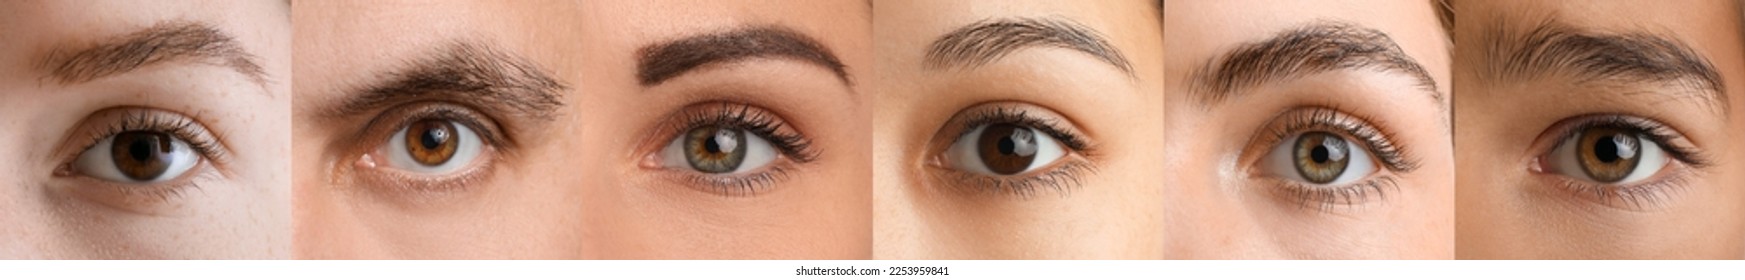 Collage with brown eyes of different people, closeup - Powered by Shutterstock